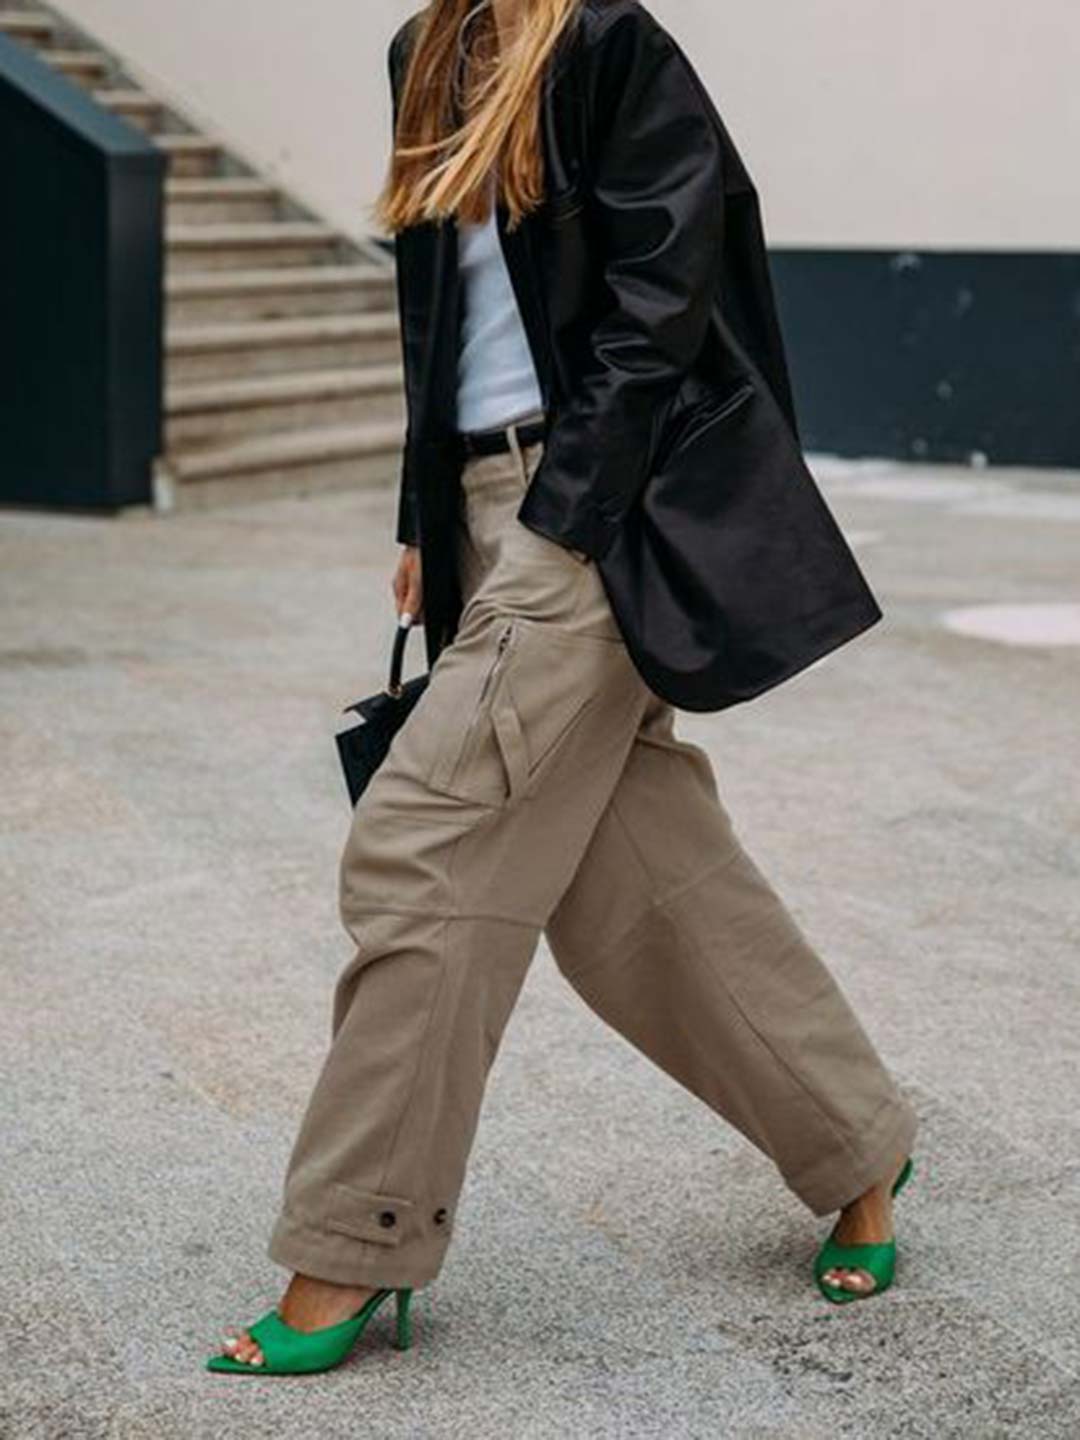 Cargo pants are trending - here are 11 of our favourite pairs | HELLO!